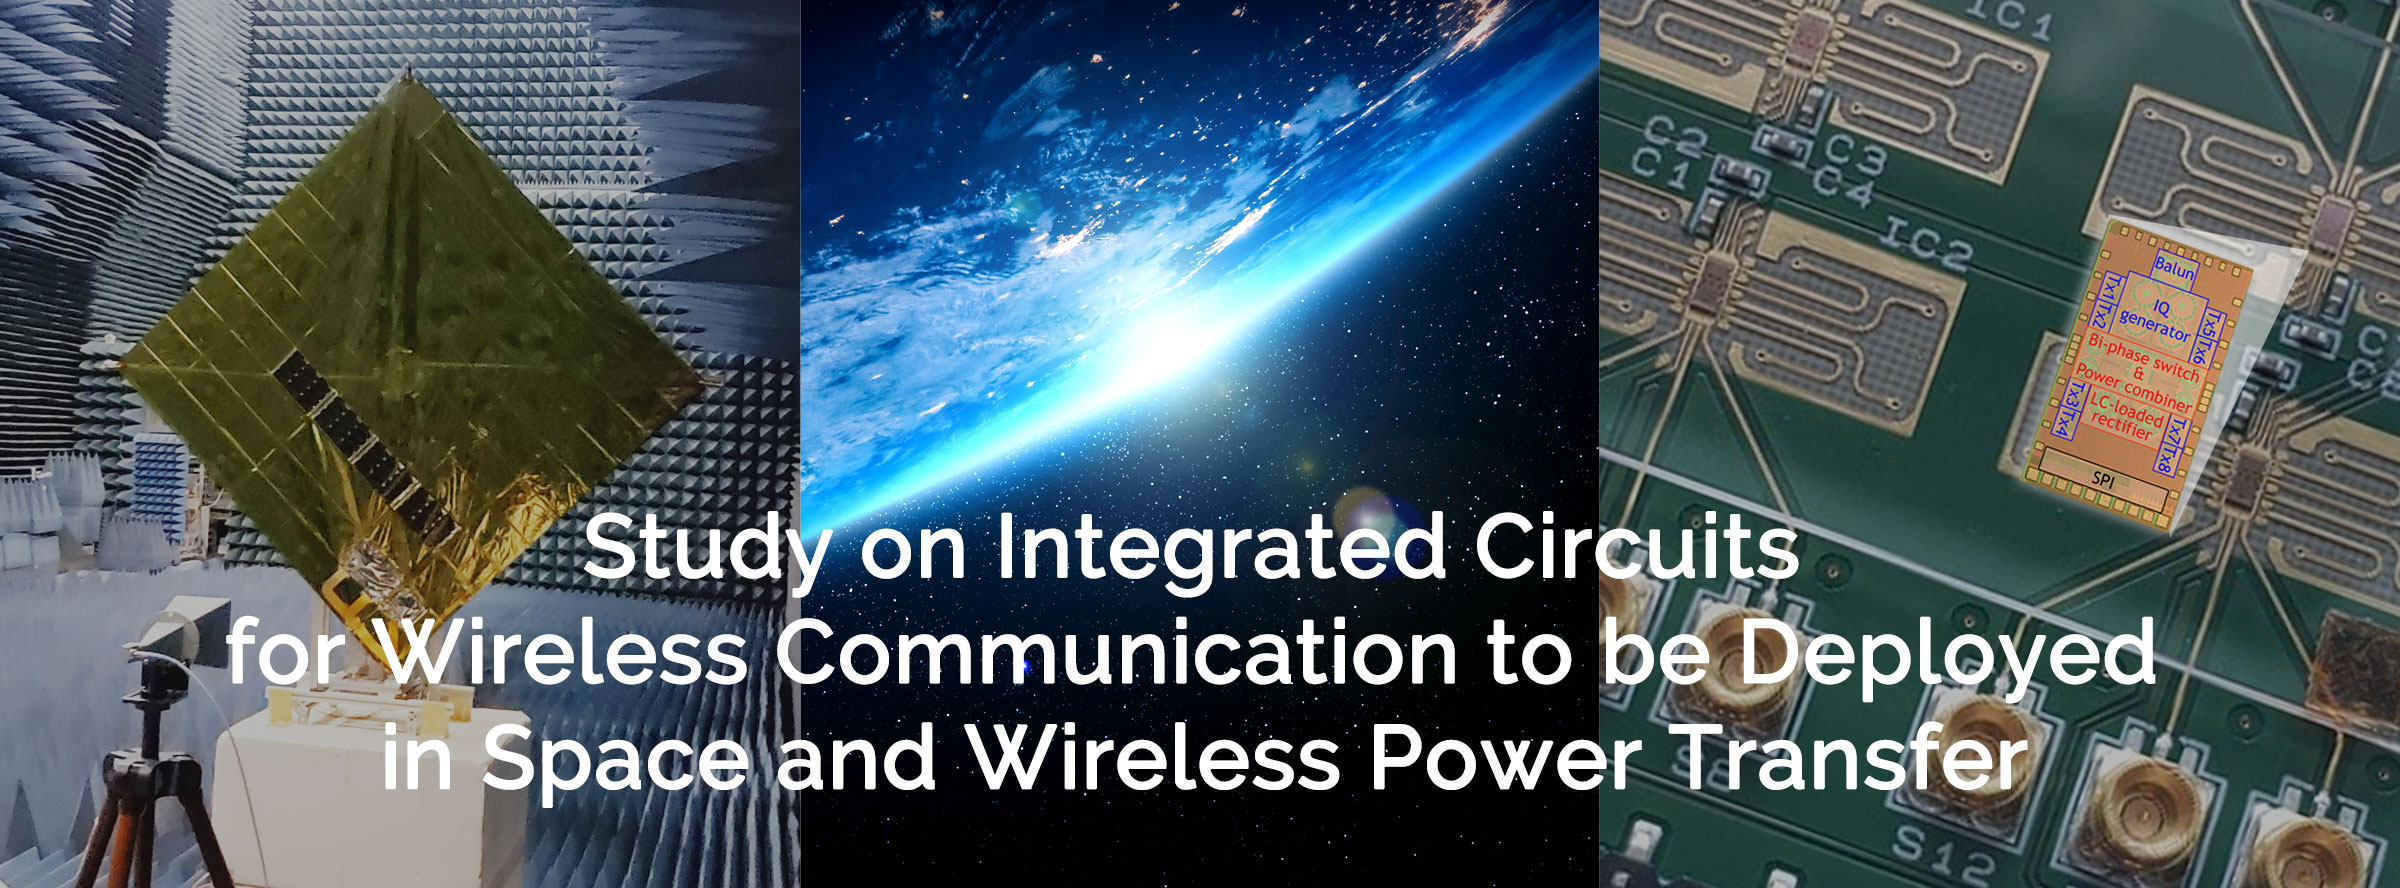 Study on Integrated Circuits for Wireless Communication to be Deployed in Space and Wireless Power Transfer